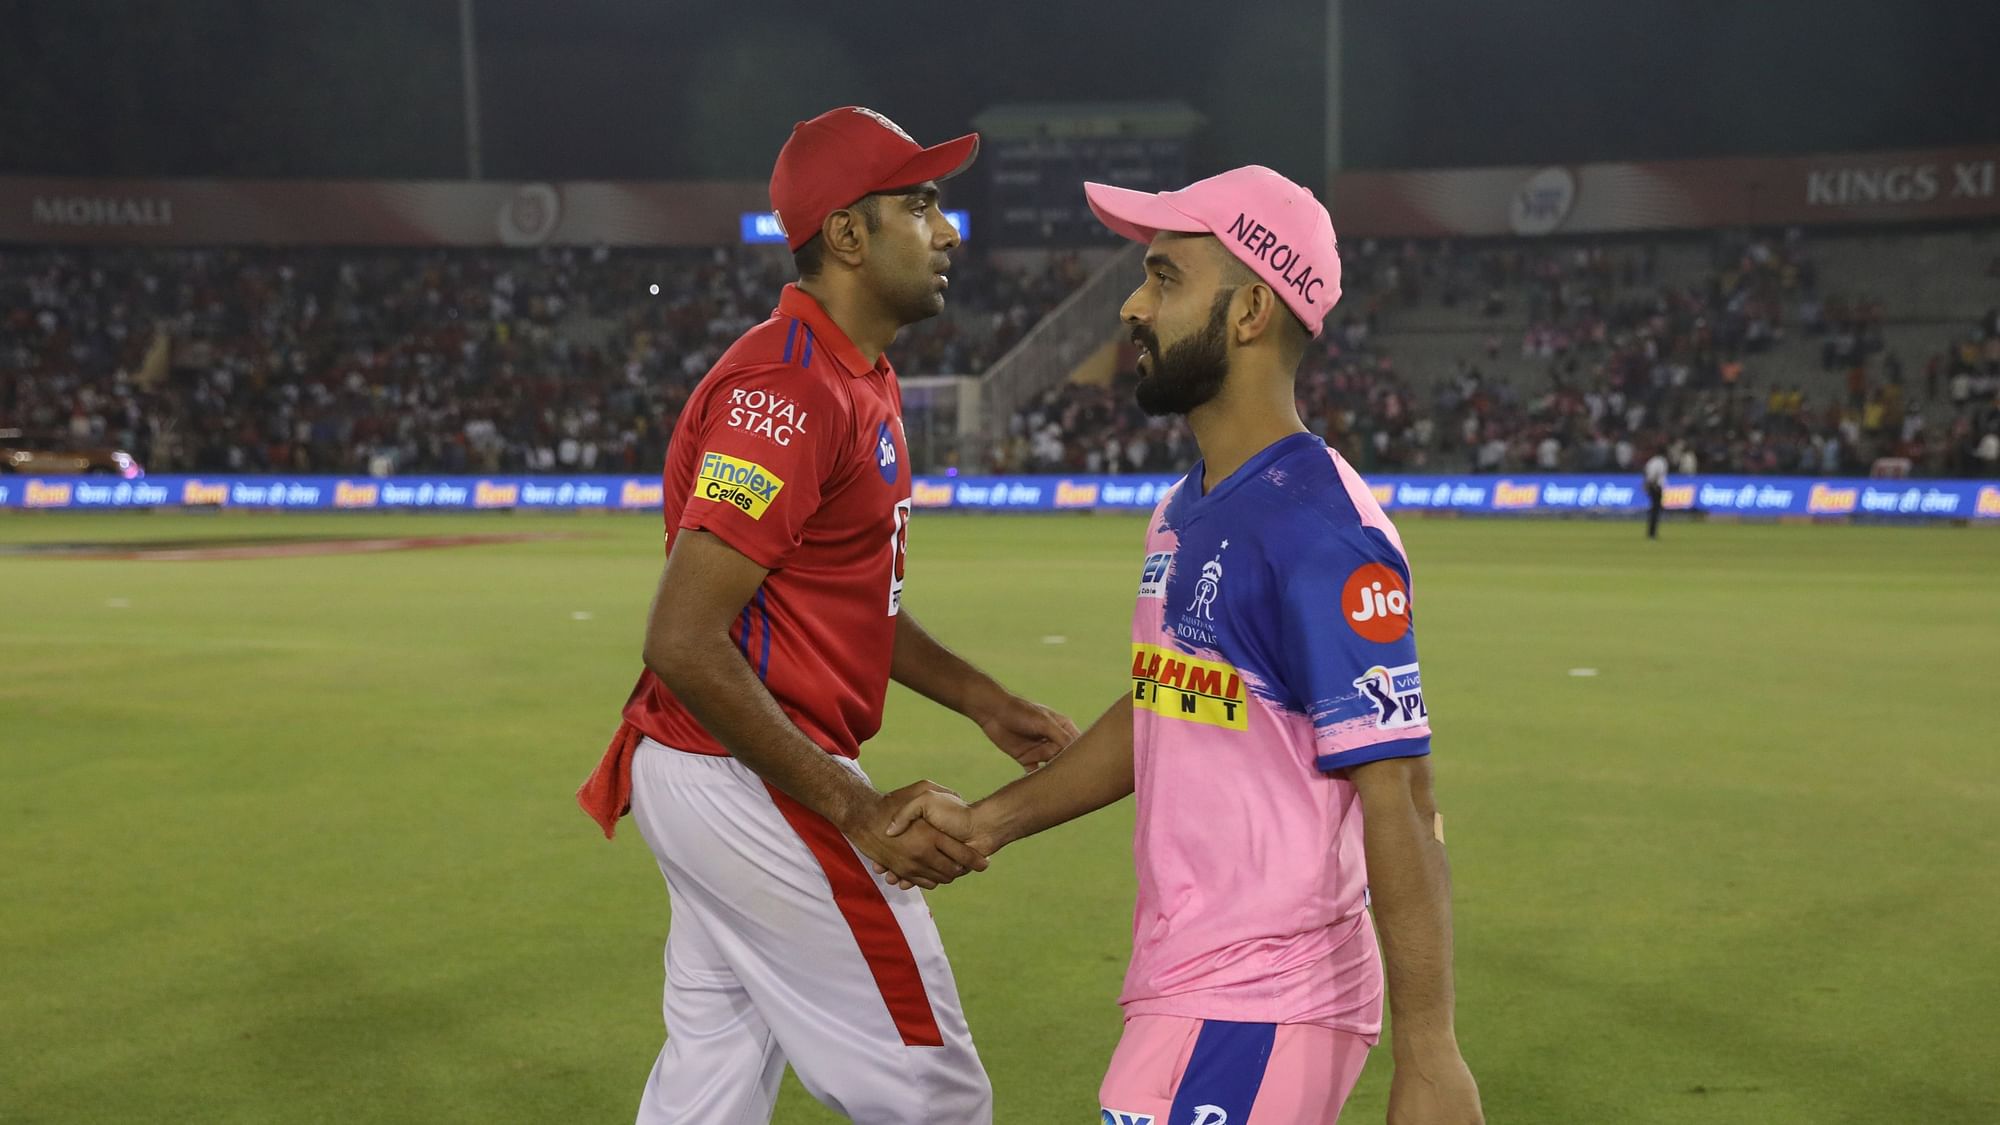  Kings XI Punjab defeated Rajasthan Royals by 12 runs in a second leg clash of the IPL on Tuesday.